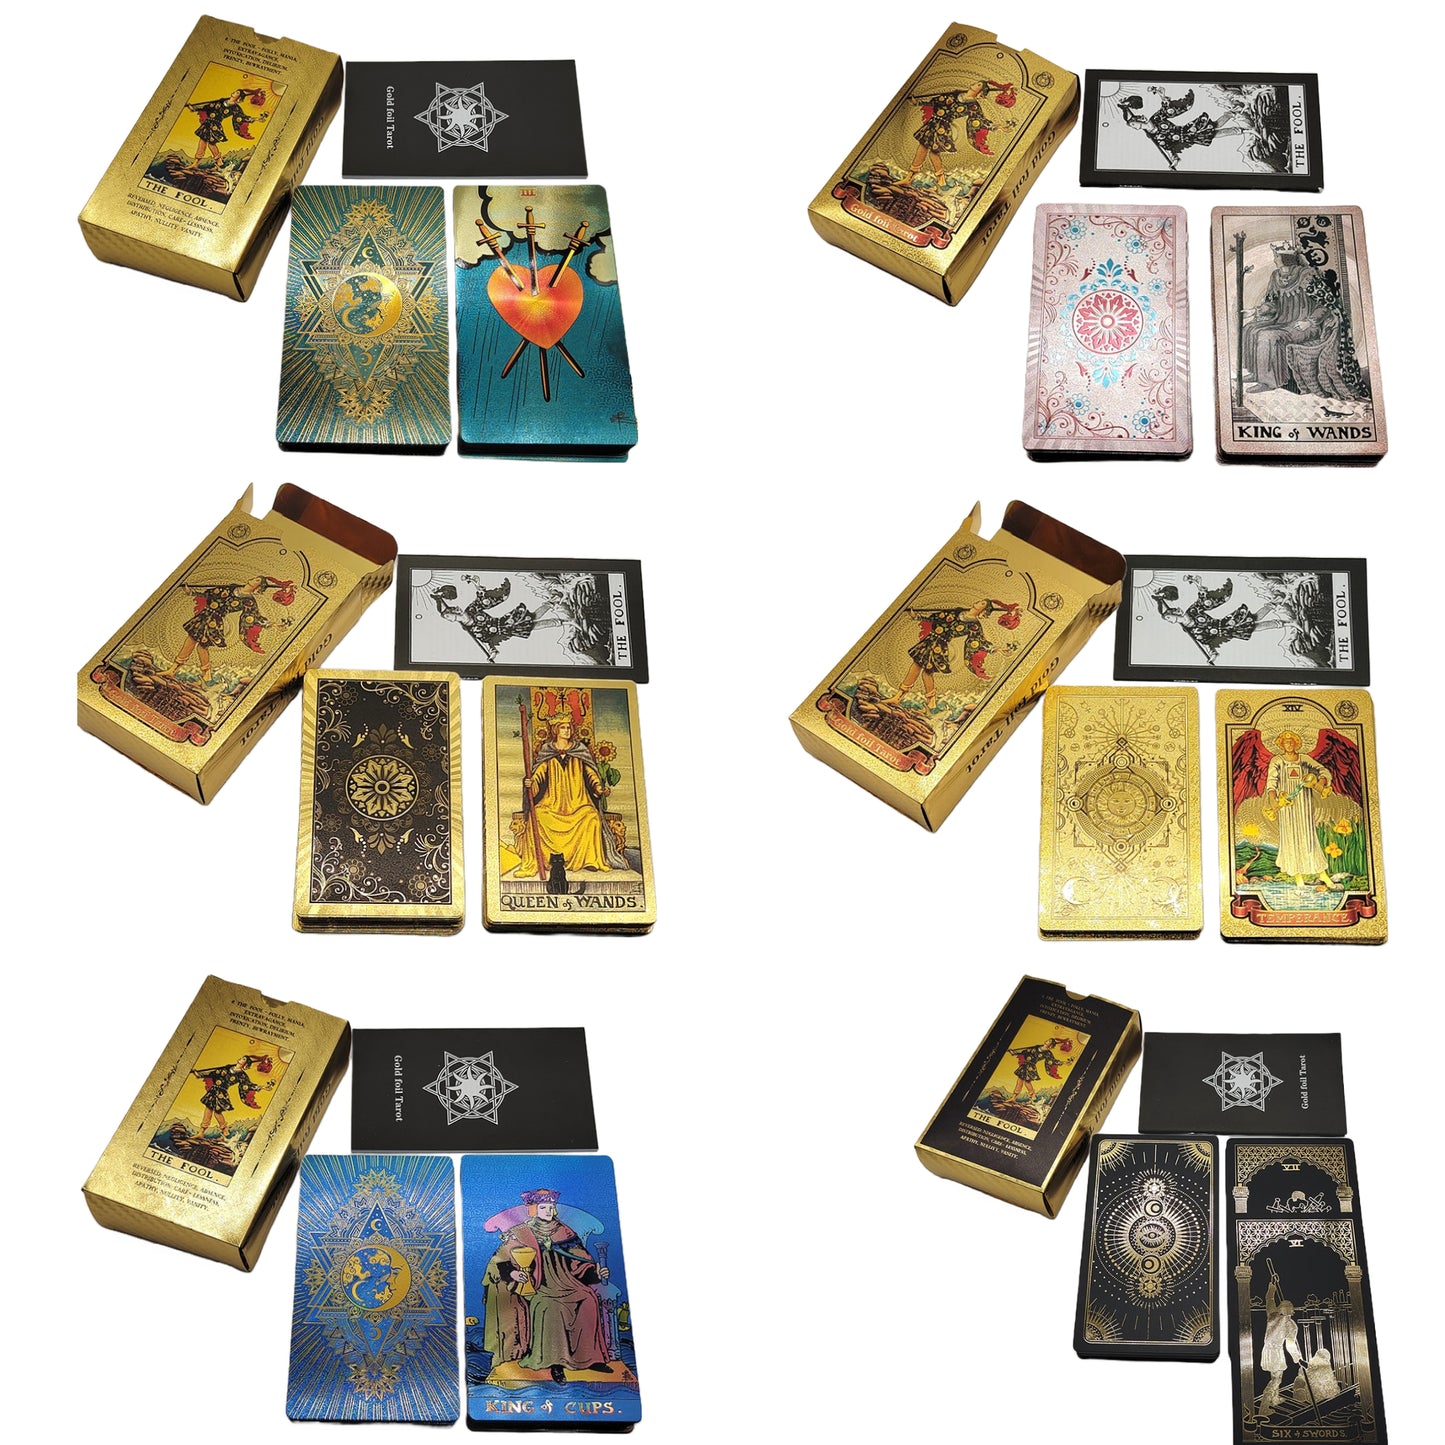 Gold Foil Tarot Deck | Premium Plastic Cards In Economic Tuck Box With English Guidebook For Beginner Divination Readers